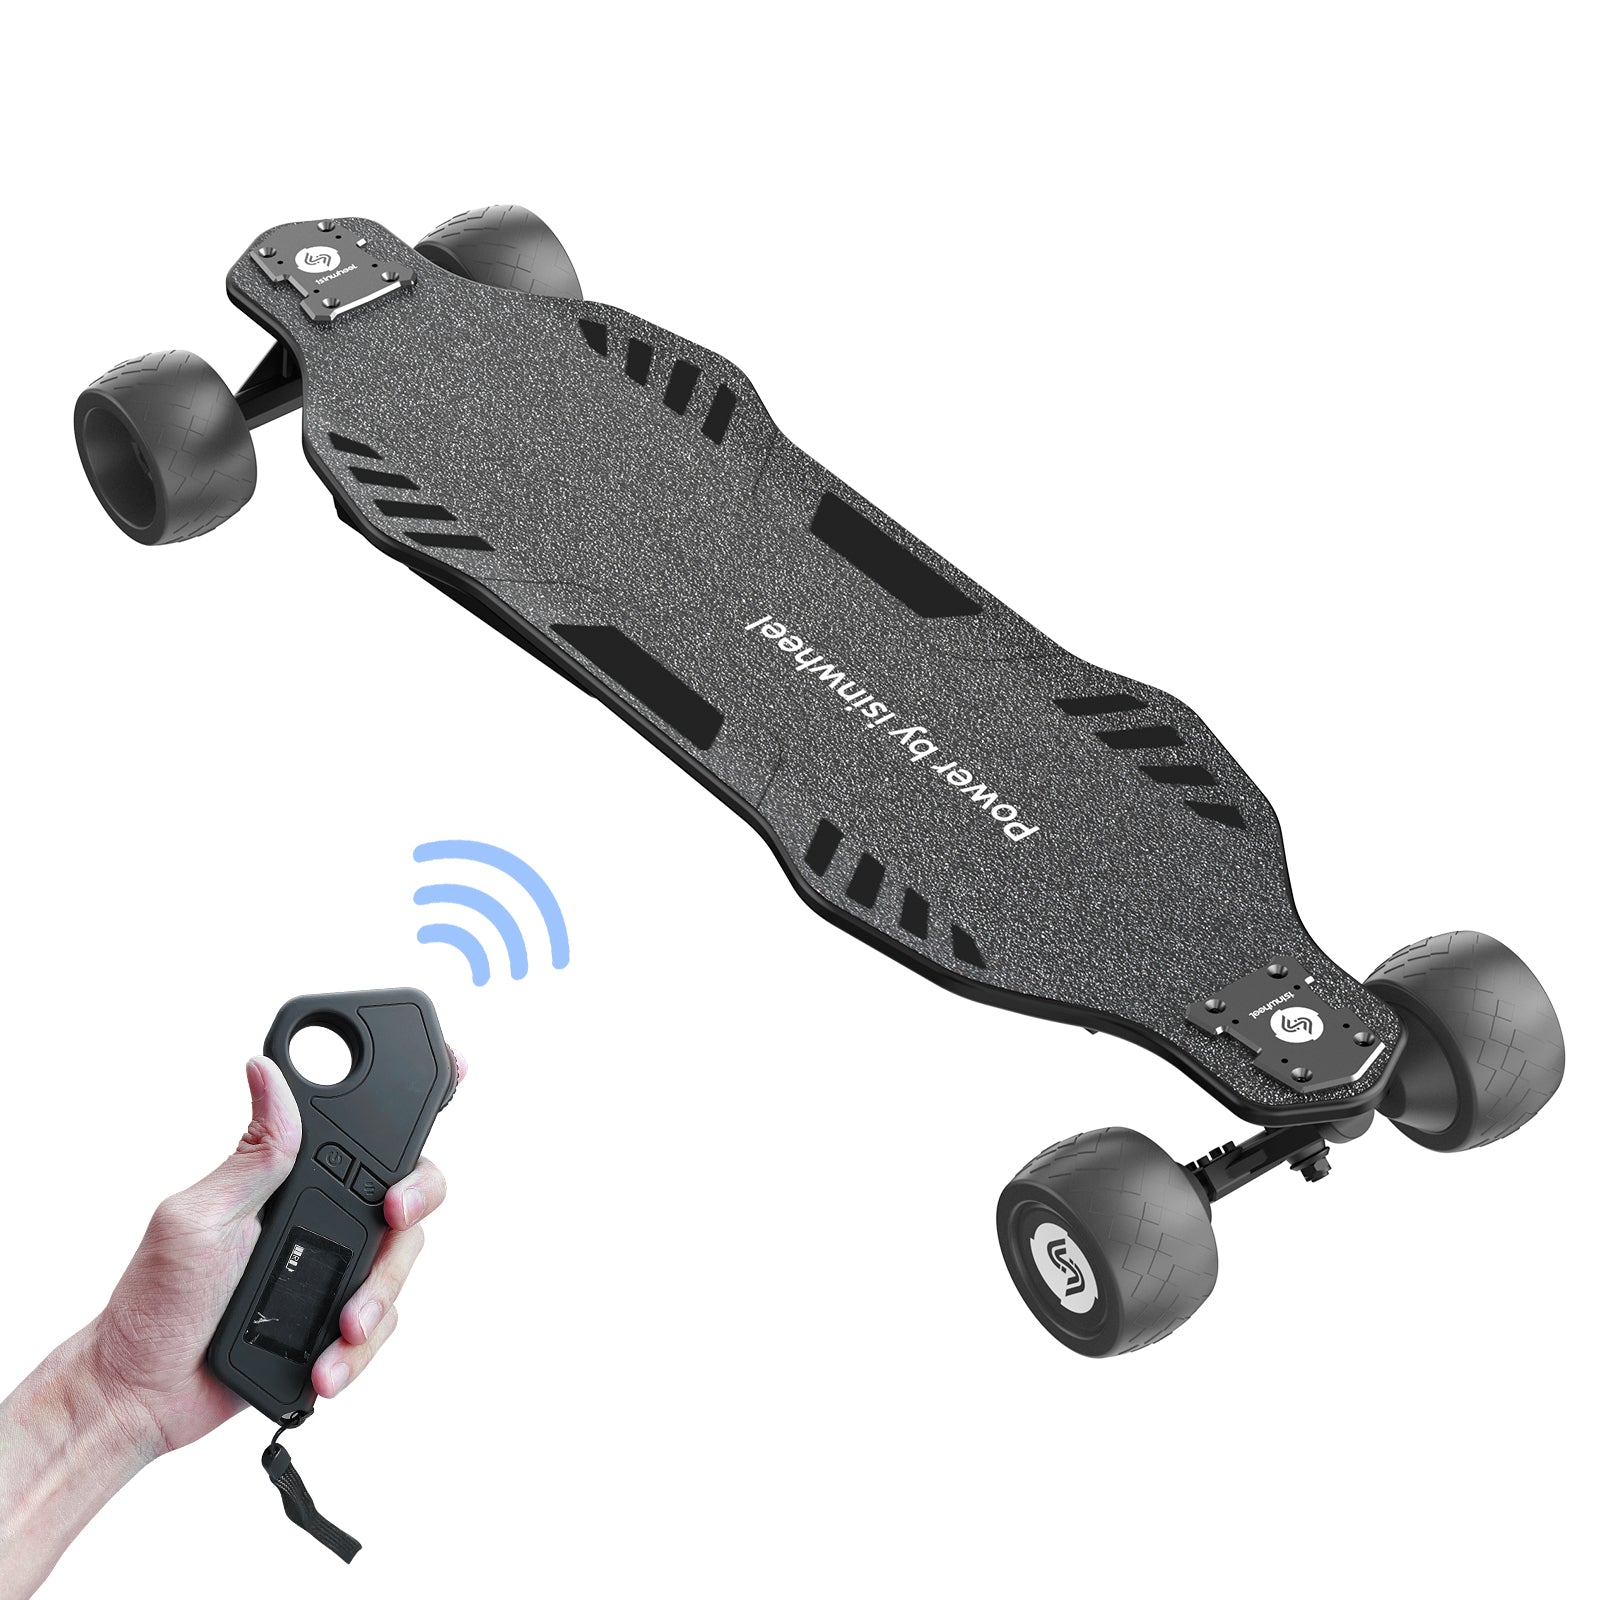 Isinwheel V8 Electric Skateboard with Portable Removable Battery & Remote Control iSinwheel Official Store